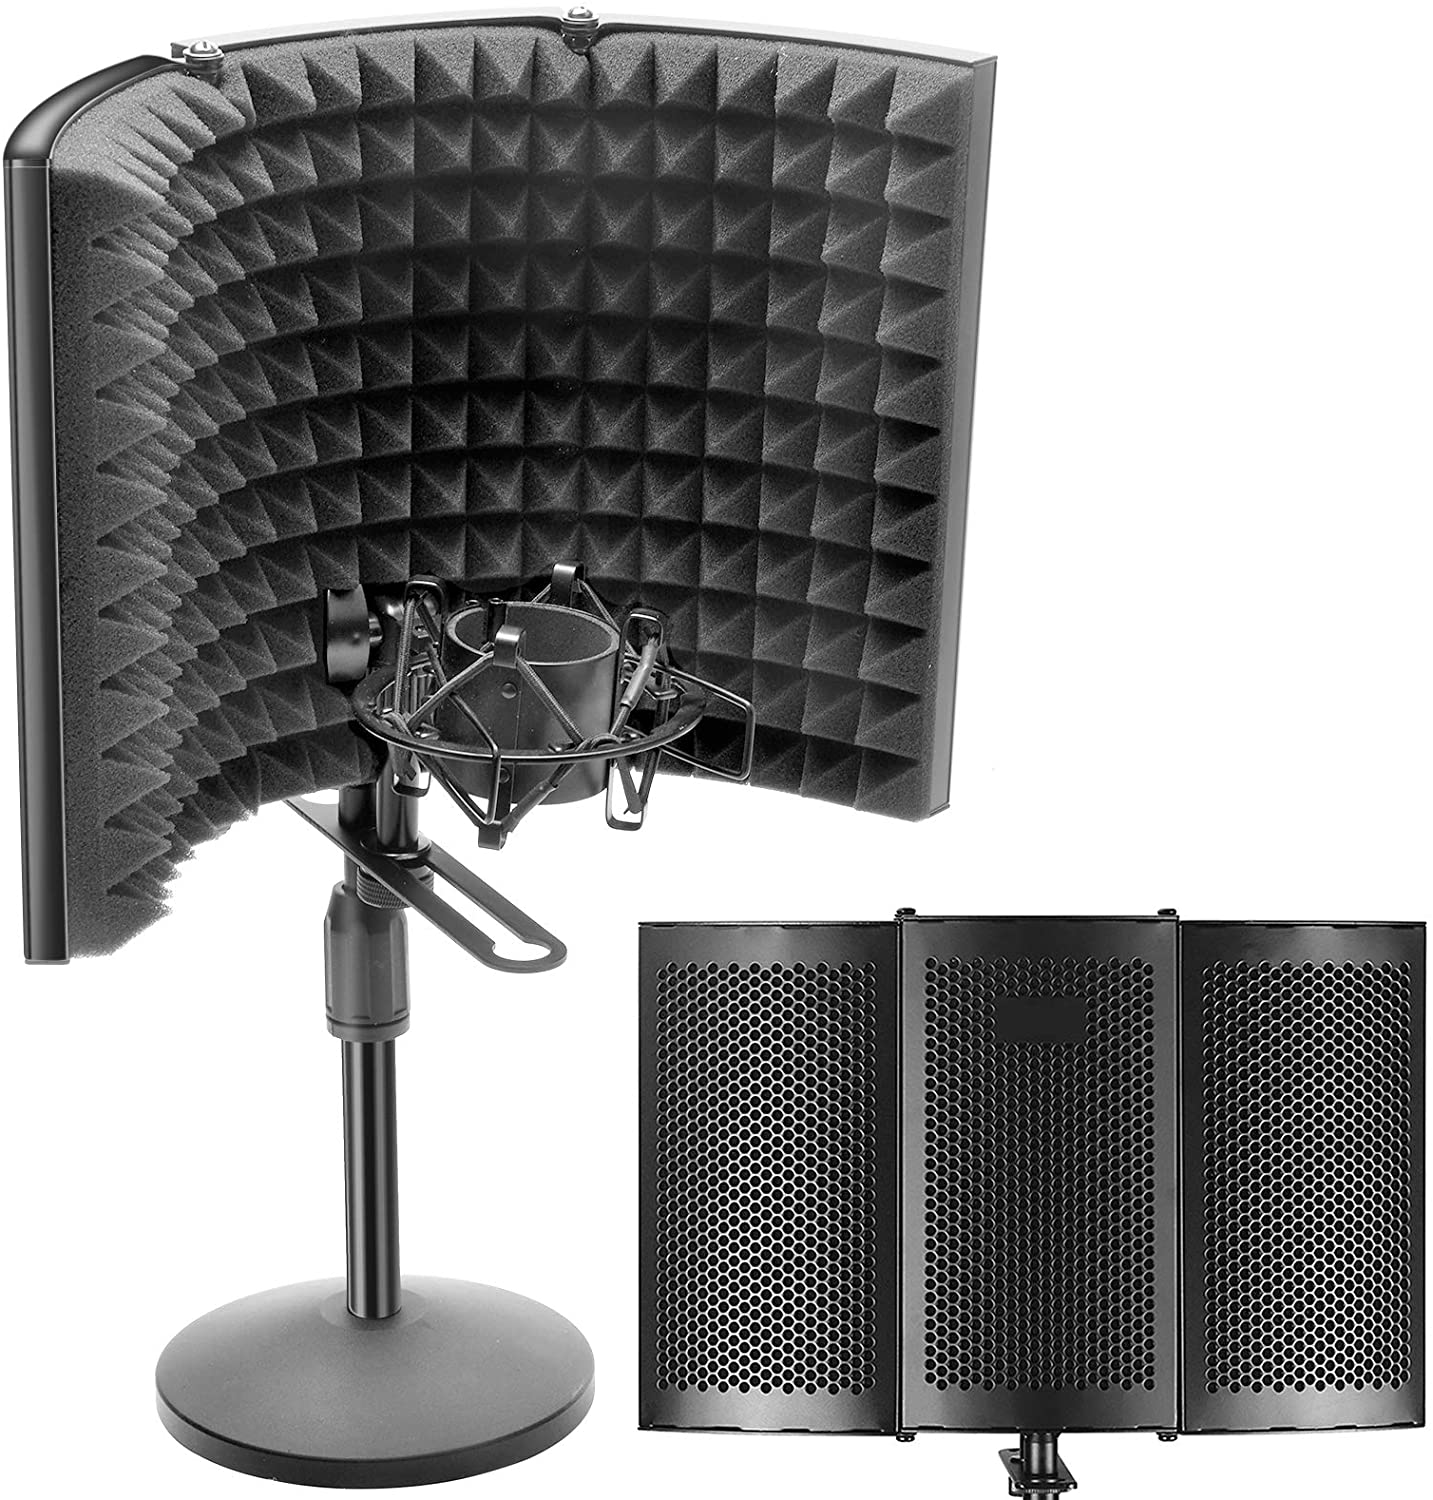 Microphone Isolation Shield with Absorbing Foam, for Sound Recording, Podcasts, Broadcasting